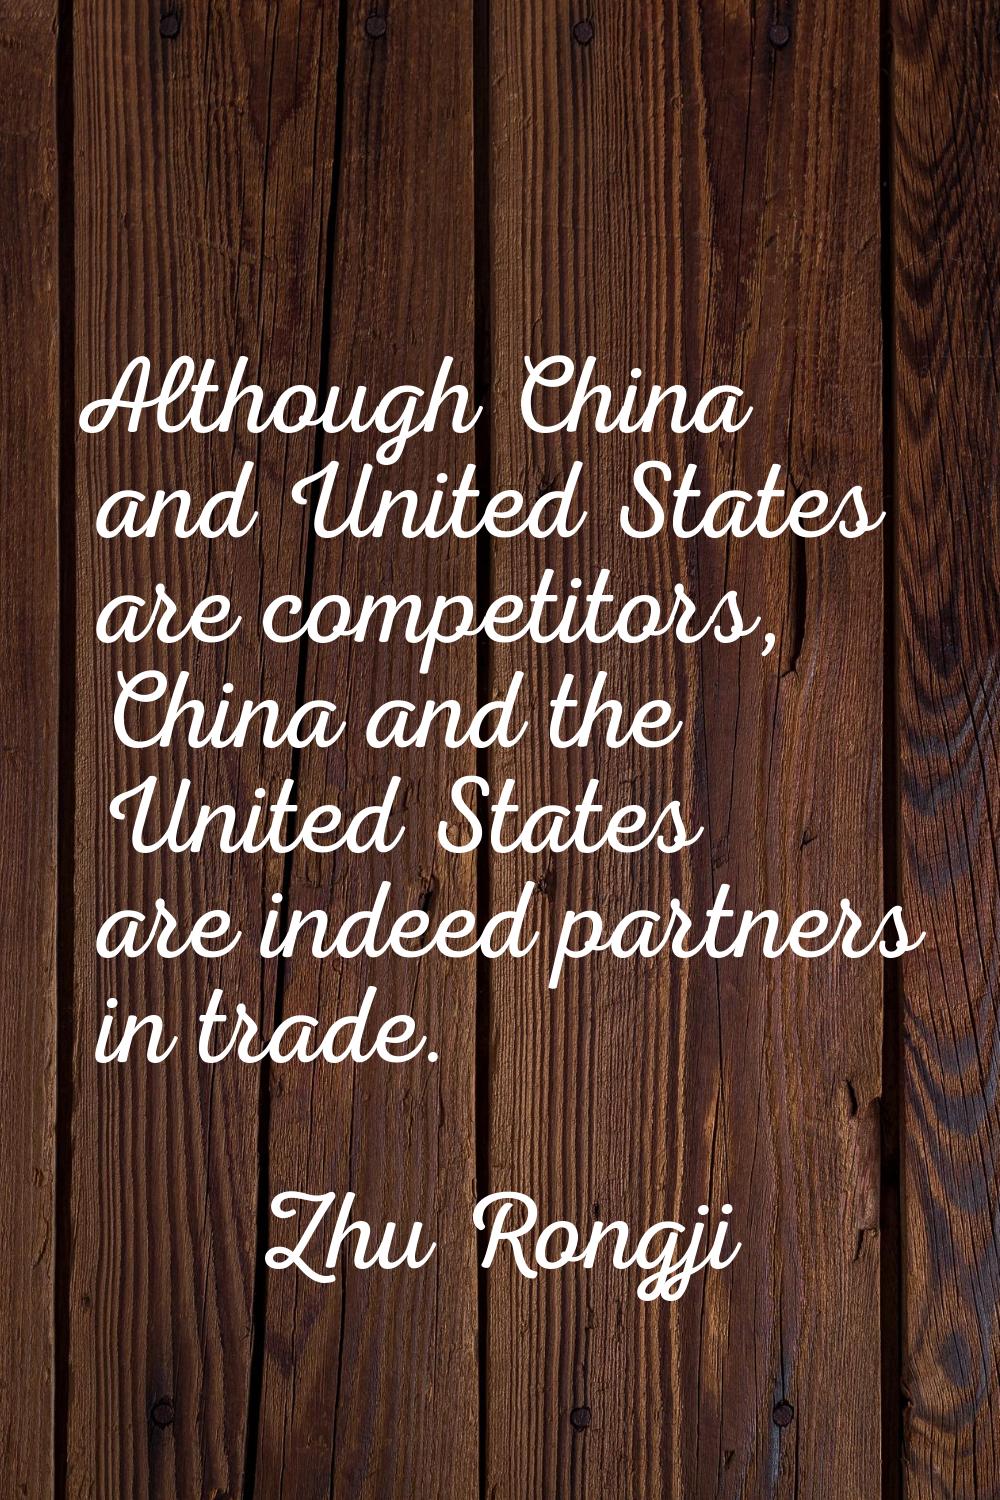 Although China and United States are competitors, China and the United States are indeed partners i